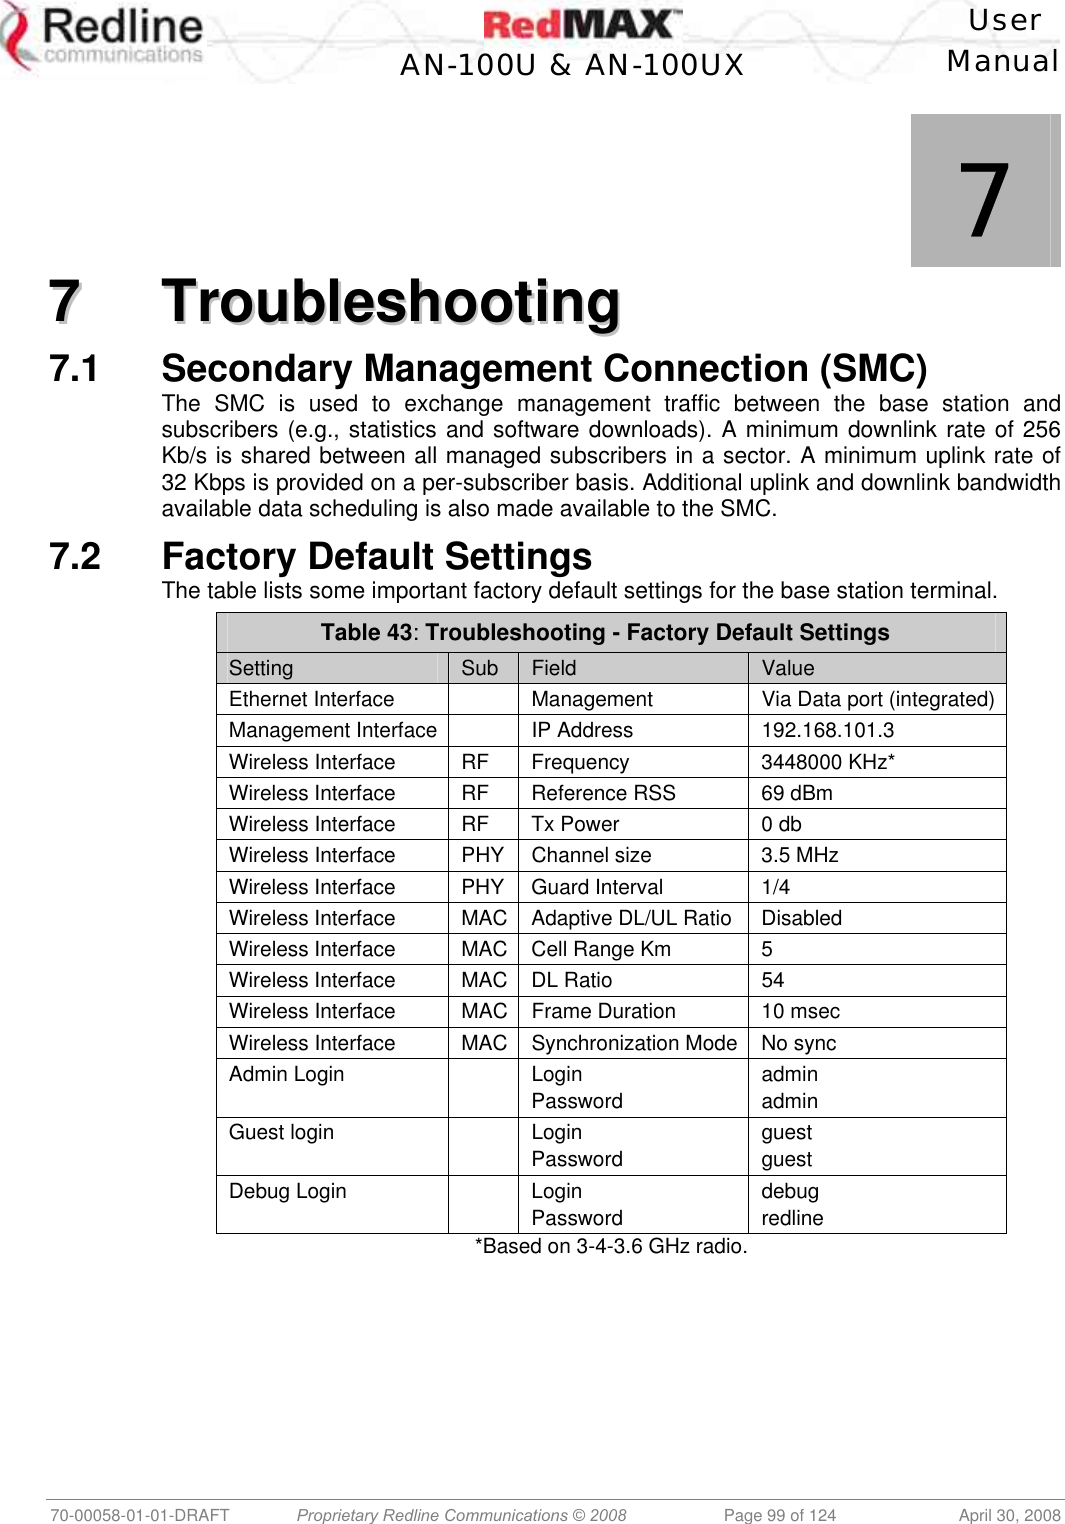    User  AN-100U &amp; AN-100UX Manual   70-00058-01-01-DRAFT  Proprietary Redline Communications © 2008   Page 99 of 124  April 30, 2008             7 77  TTrroouubblleesshhoooottiinngg  7.1  Secondary Management Connection (SMC) The SMC is used to exchange management traffic between the base station and subscribers (e.g., statistics and software downloads). A minimum downlink rate of 256 Kb/s is shared between all managed subscribers in a sector. A minimum uplink rate of 32 Kbps is provided on a per-subscriber basis. Additional uplink and downlink bandwidth available data scheduling is also made available to the SMC. 7.2  Factory Default Settings The table lists some important factory default settings for the base station terminal. Table 43: Troubleshooting - Factory Default Settings Setting  Sub  Field  Value Ethernet Interface    Management  Via Data port (integrated)Management Interface   IP Address  192.168.101.3 Wireless Interface  RF  Frequency  3448000 KHz* Wireless Interface  RF  Reference RSS  69 dBm Wireless Interface  RF  Tx Power  0 db Wireless Interface  PHY  Channel size  3.5 MHz Wireless Interface  PHY  Guard Interval  1/4 Wireless Interface  MAC Adaptive DL/UL Ratio  Disabled Wireless Interface  MAC Cell Range Km  5  Wireless Interface  MAC DL Ratio  54 Wireless Interface  MAC Frame Duration  10 msec Wireless Interface  MAC Synchronization Mode No sync Admin Login    Login Password admin admin Guest login    Login Password guest guest Debug Login    Login Password debug redline *Based on 3-4-3.6 GHz radio.  